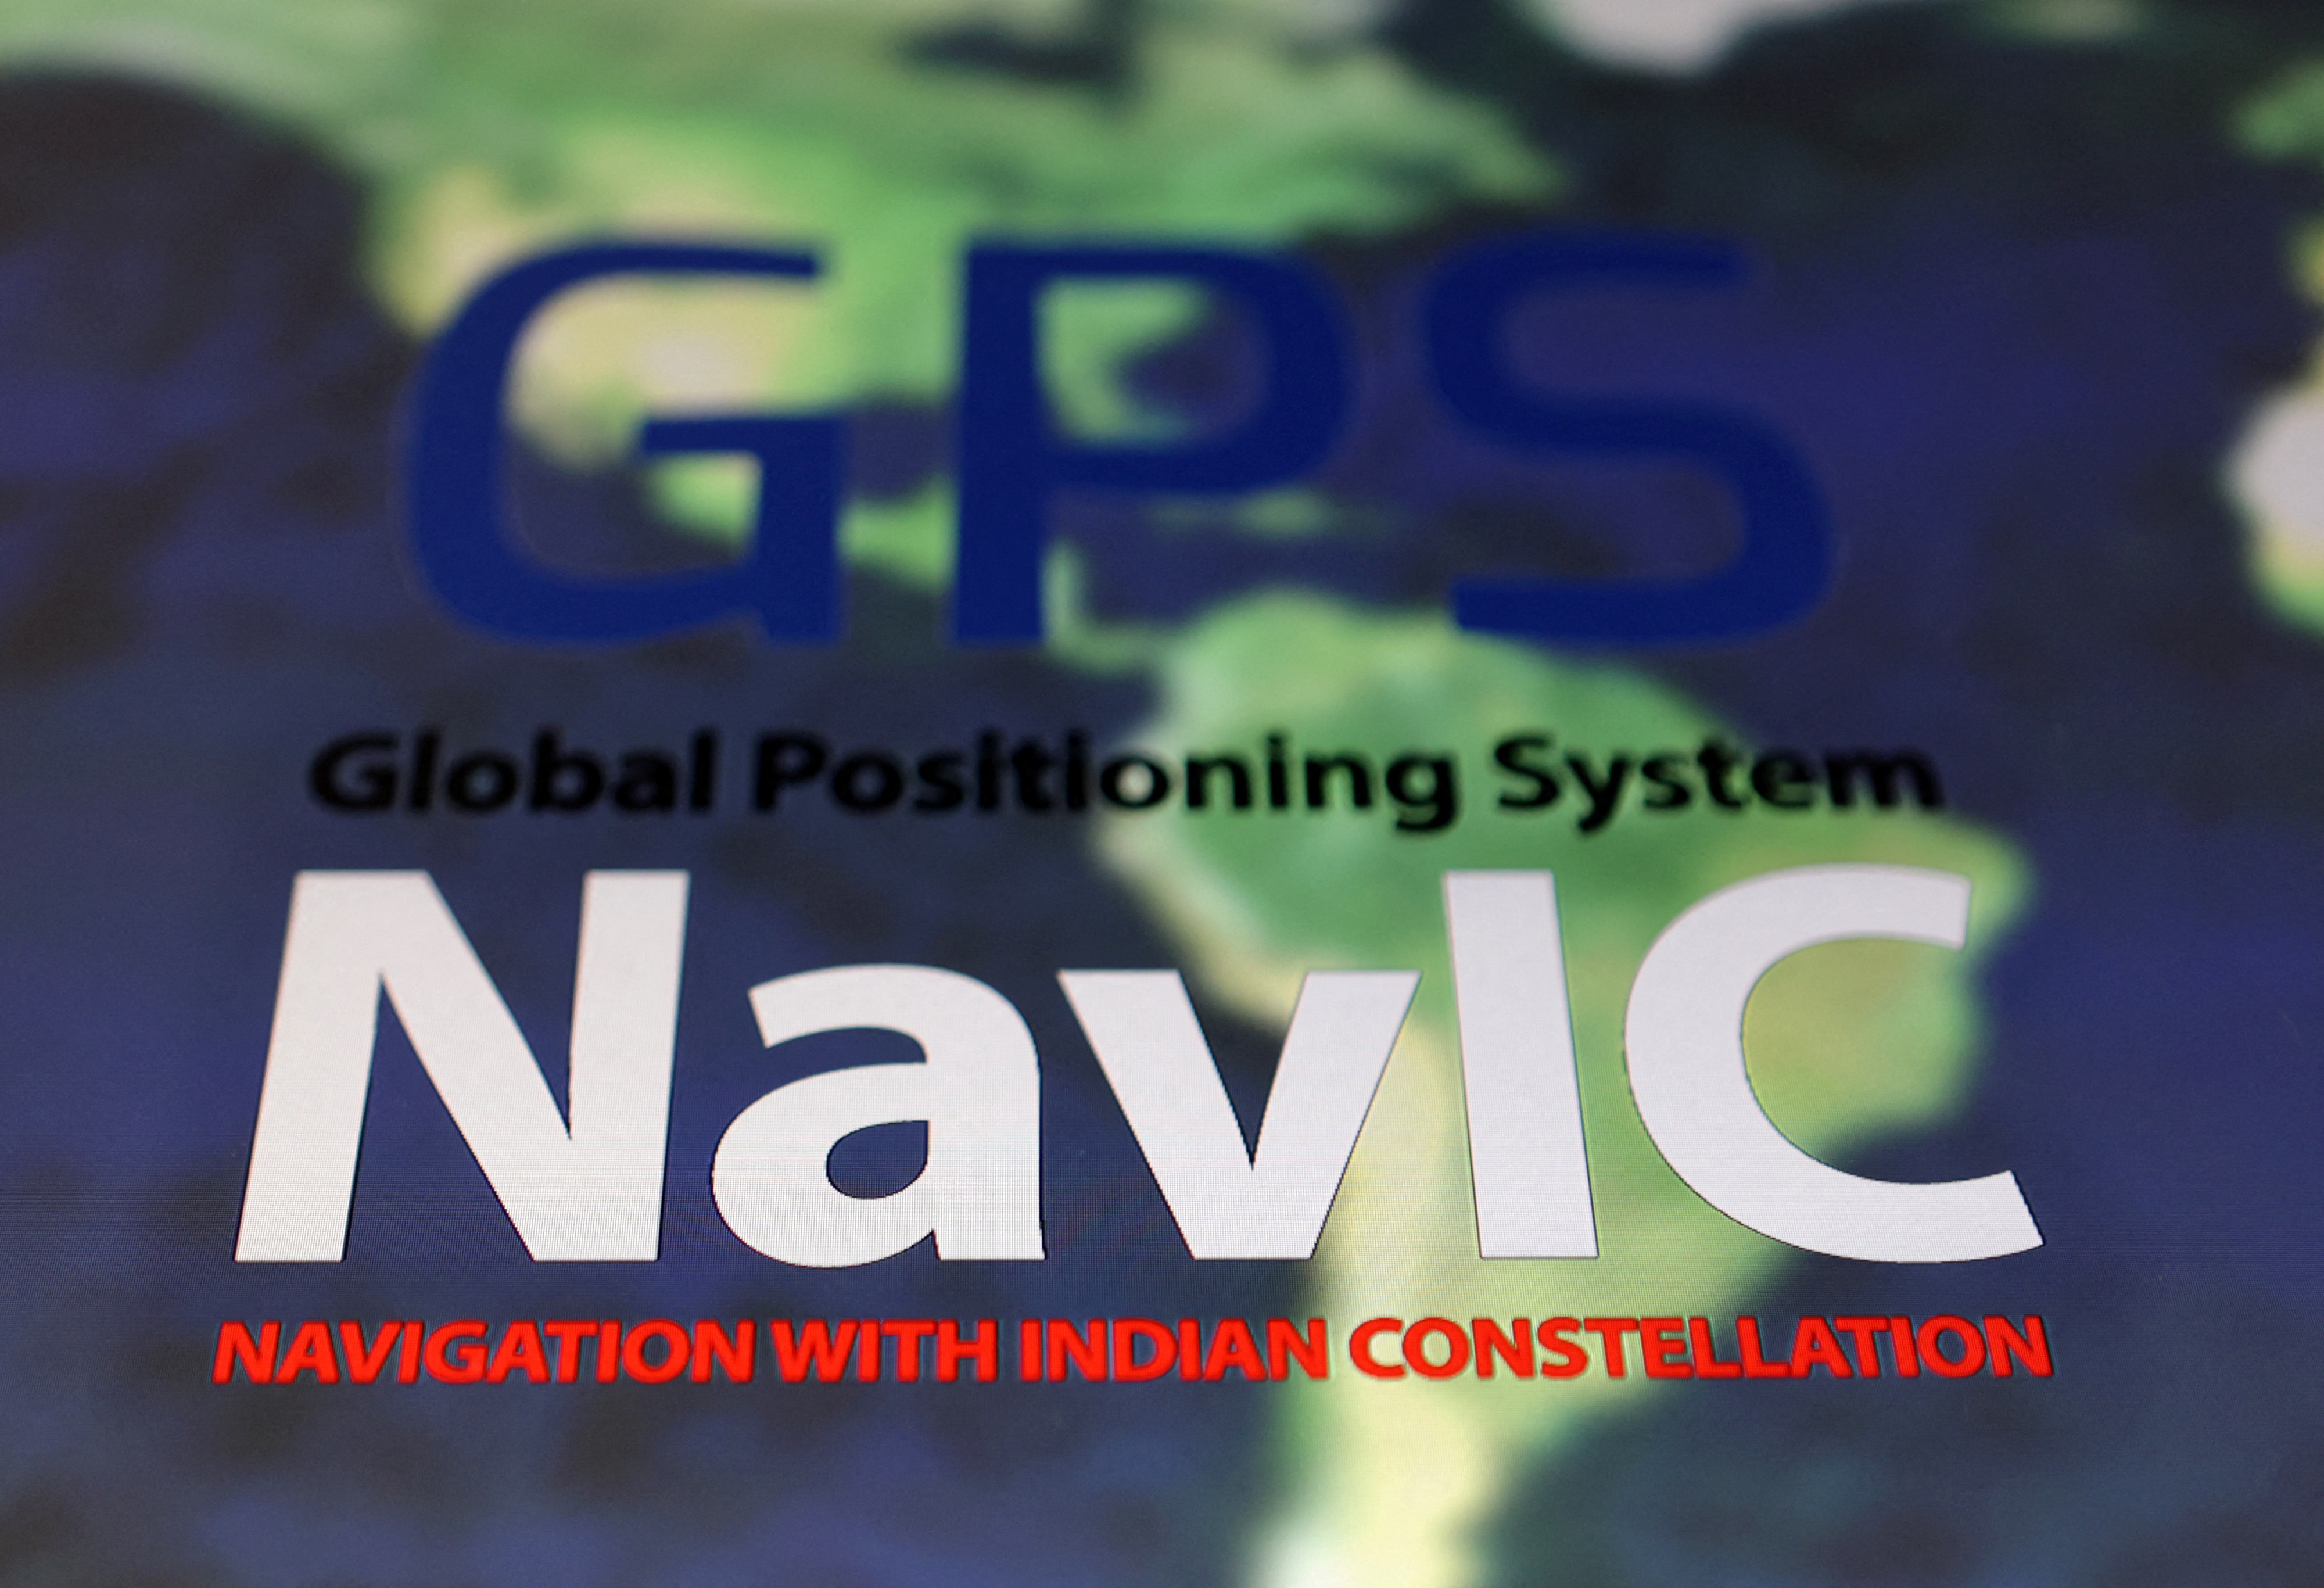 Illustration shows NavIC (Navigation with Indian Constellation) and GPS (Global Positioning System) logos